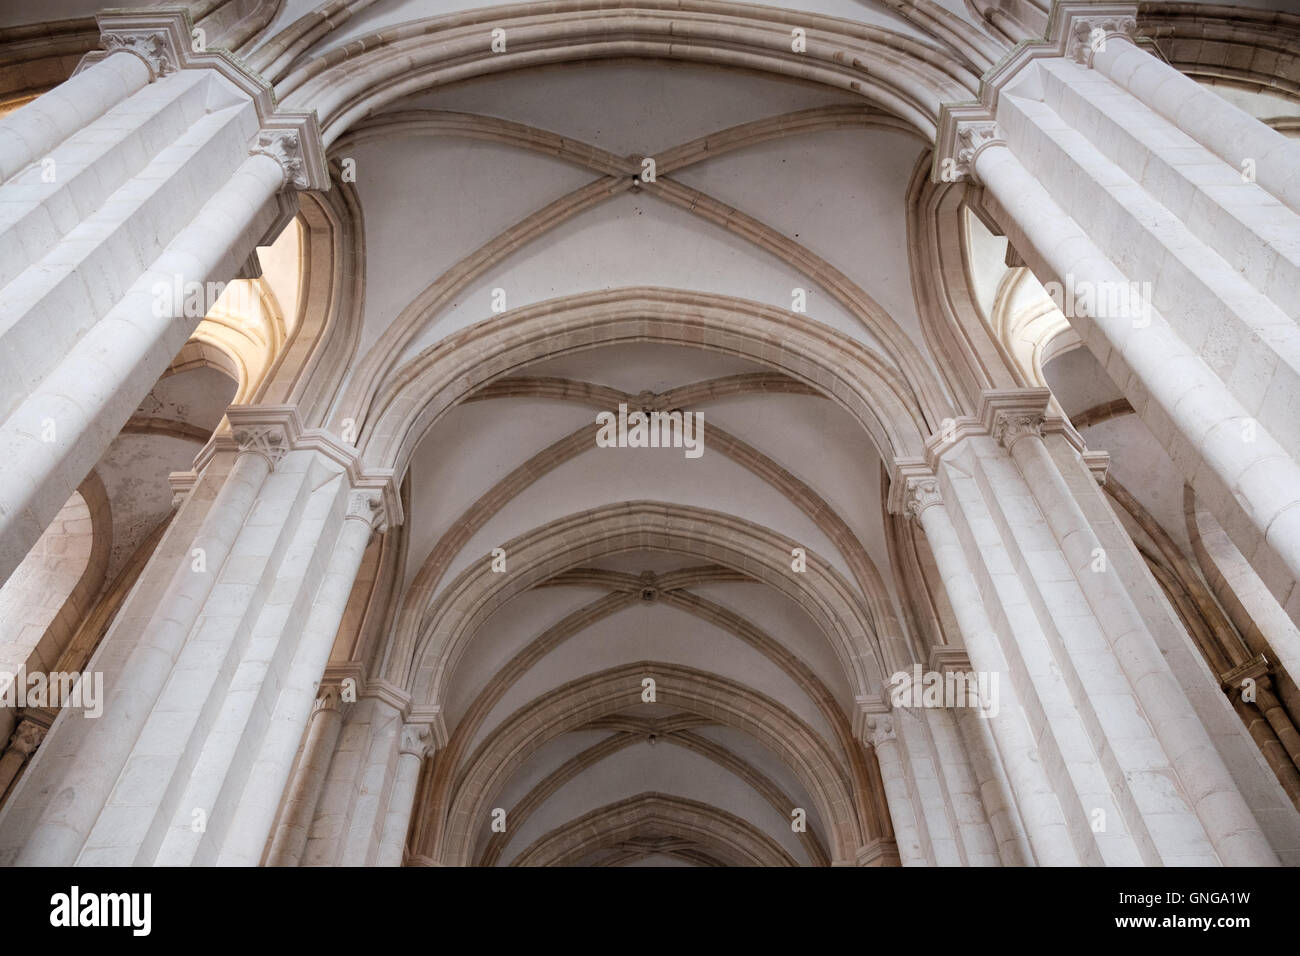 The columns and vaulted roof of the church at the Alcobaça Monastery, Portugal Stock Photo